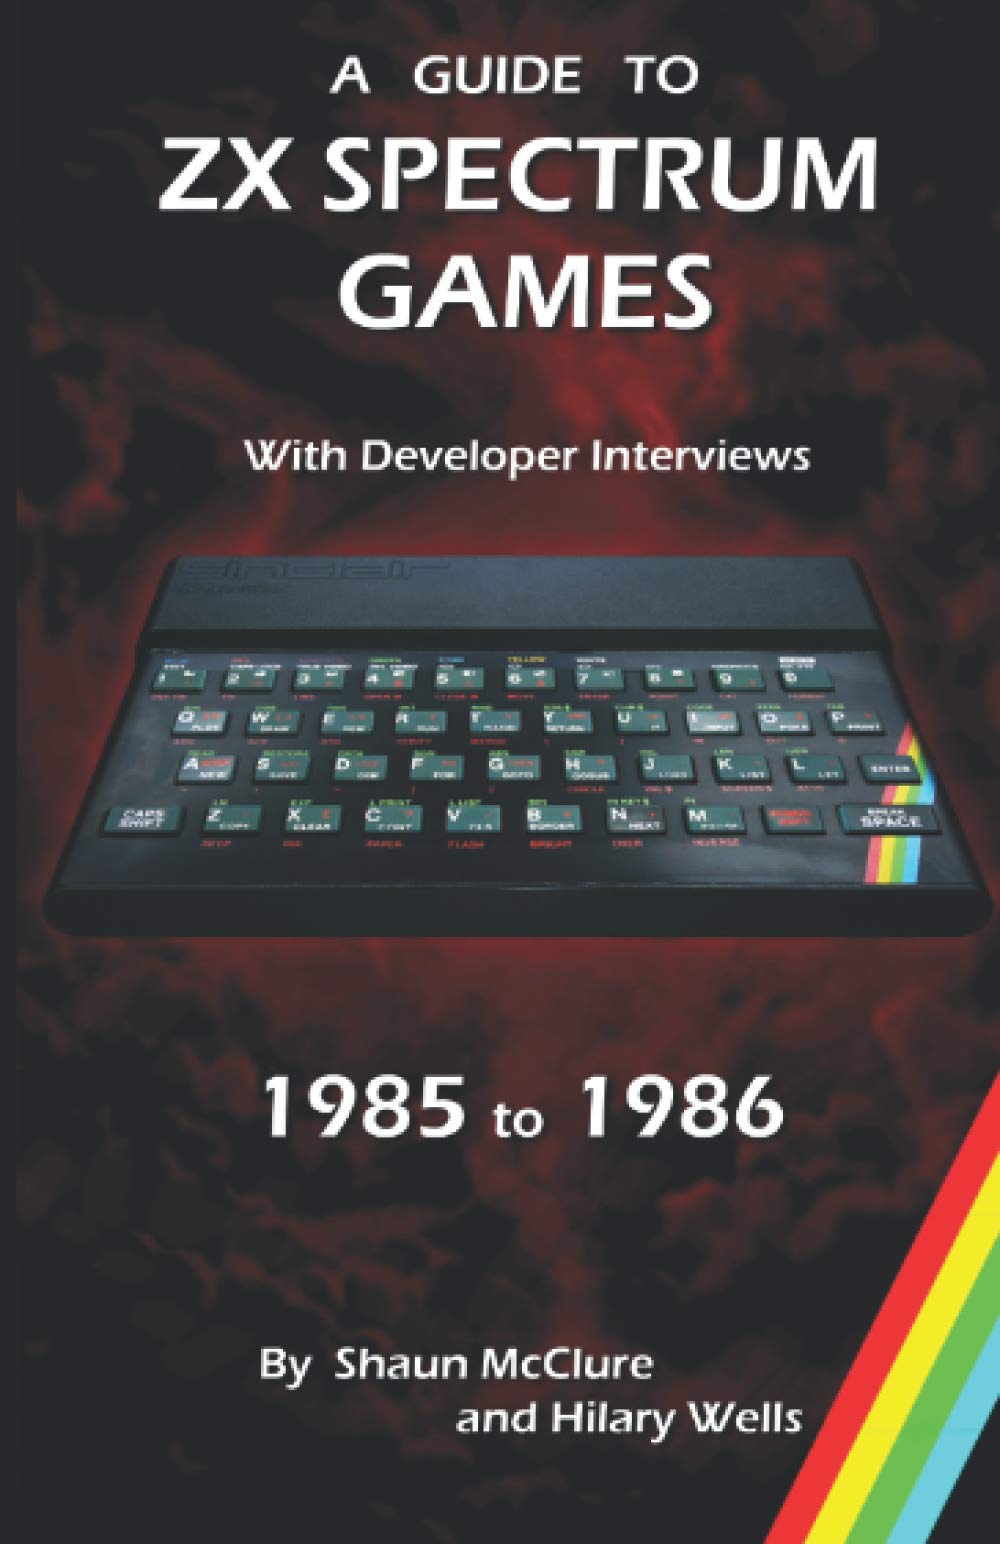 A Guide to ZX Spectrum Games - 1985 to 1986 image, screenshot or loading screen